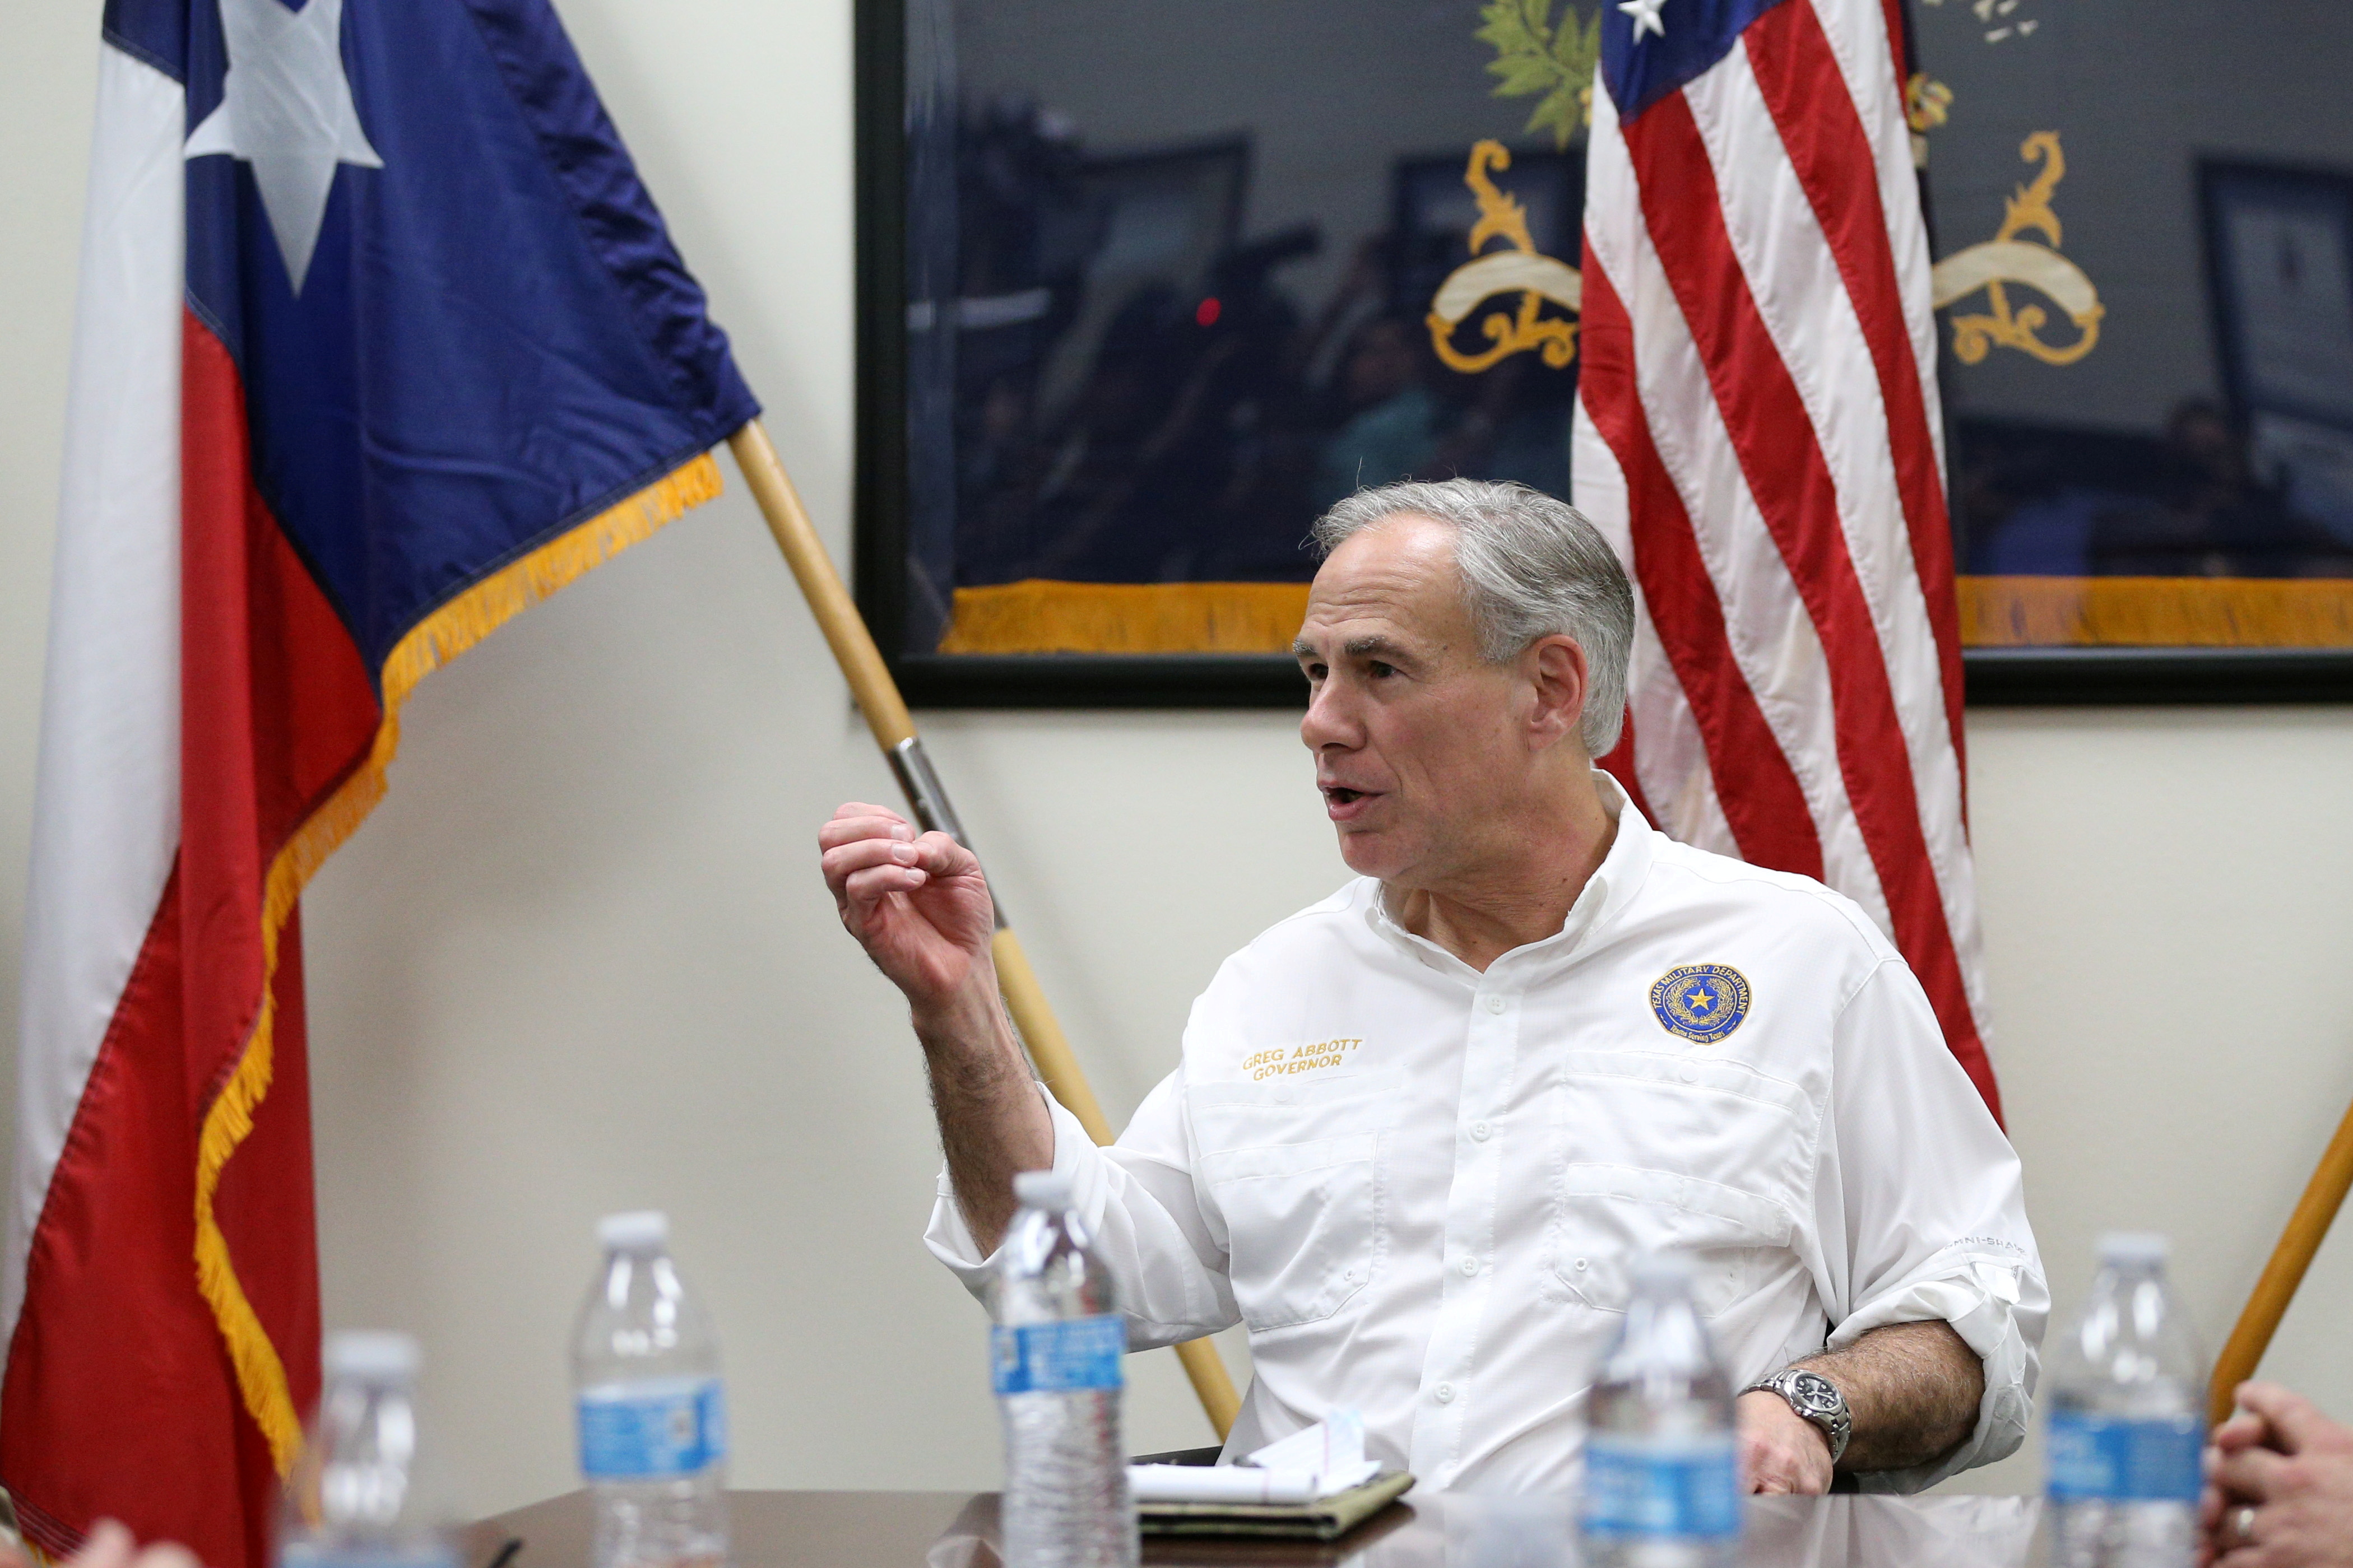 Governor Greg Abbott meets with Texas National Guard troops and U.S. Border Patrol personnel for a briefing regarding security along the Mexico-U.S. border in Weslaco